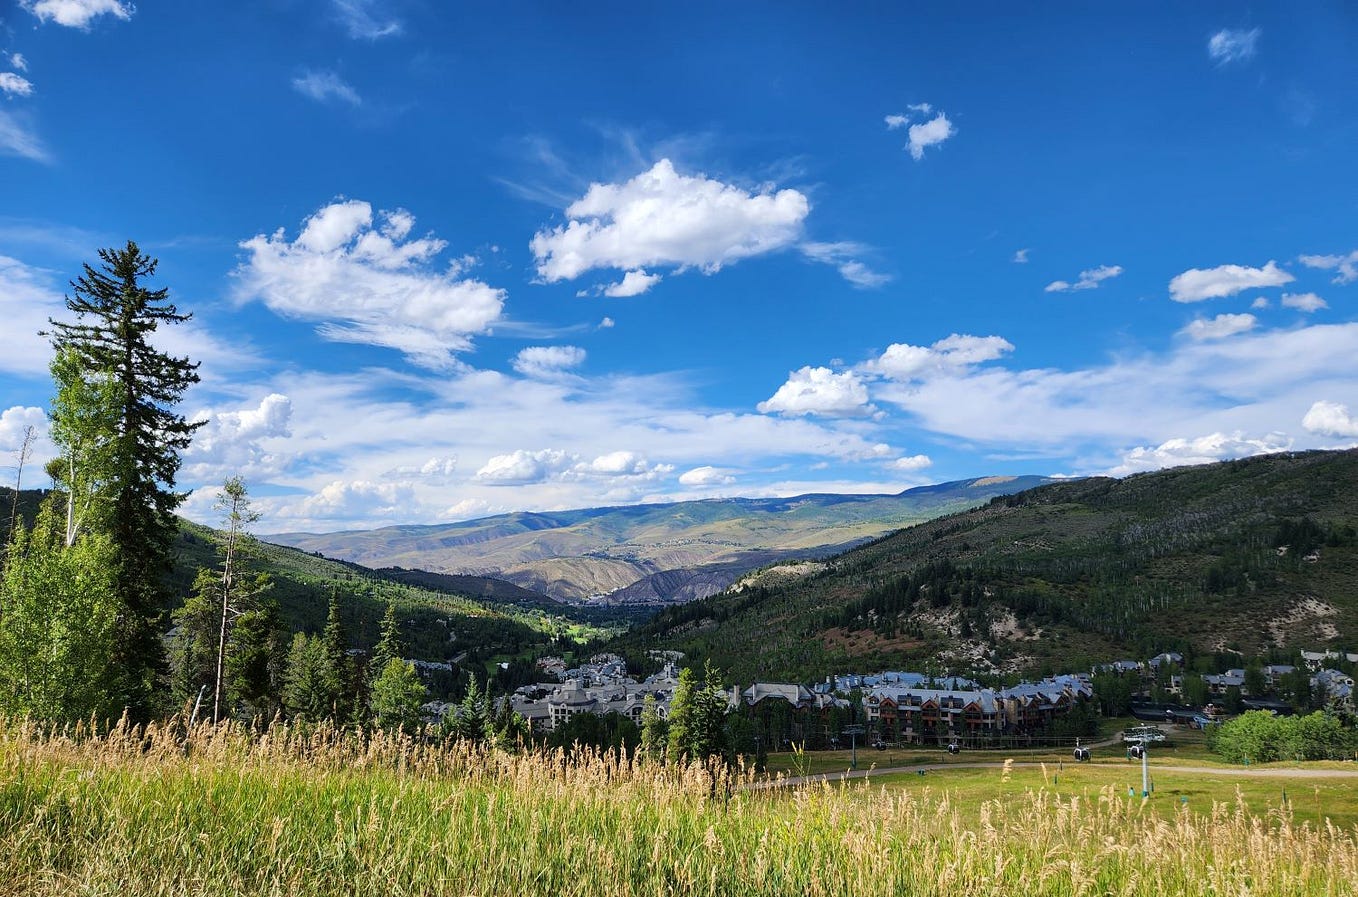 View of mountains with the town of Beaver Creek, Colorado in foreground under blue sky with white clouds, a tall evergreen, and green grass.